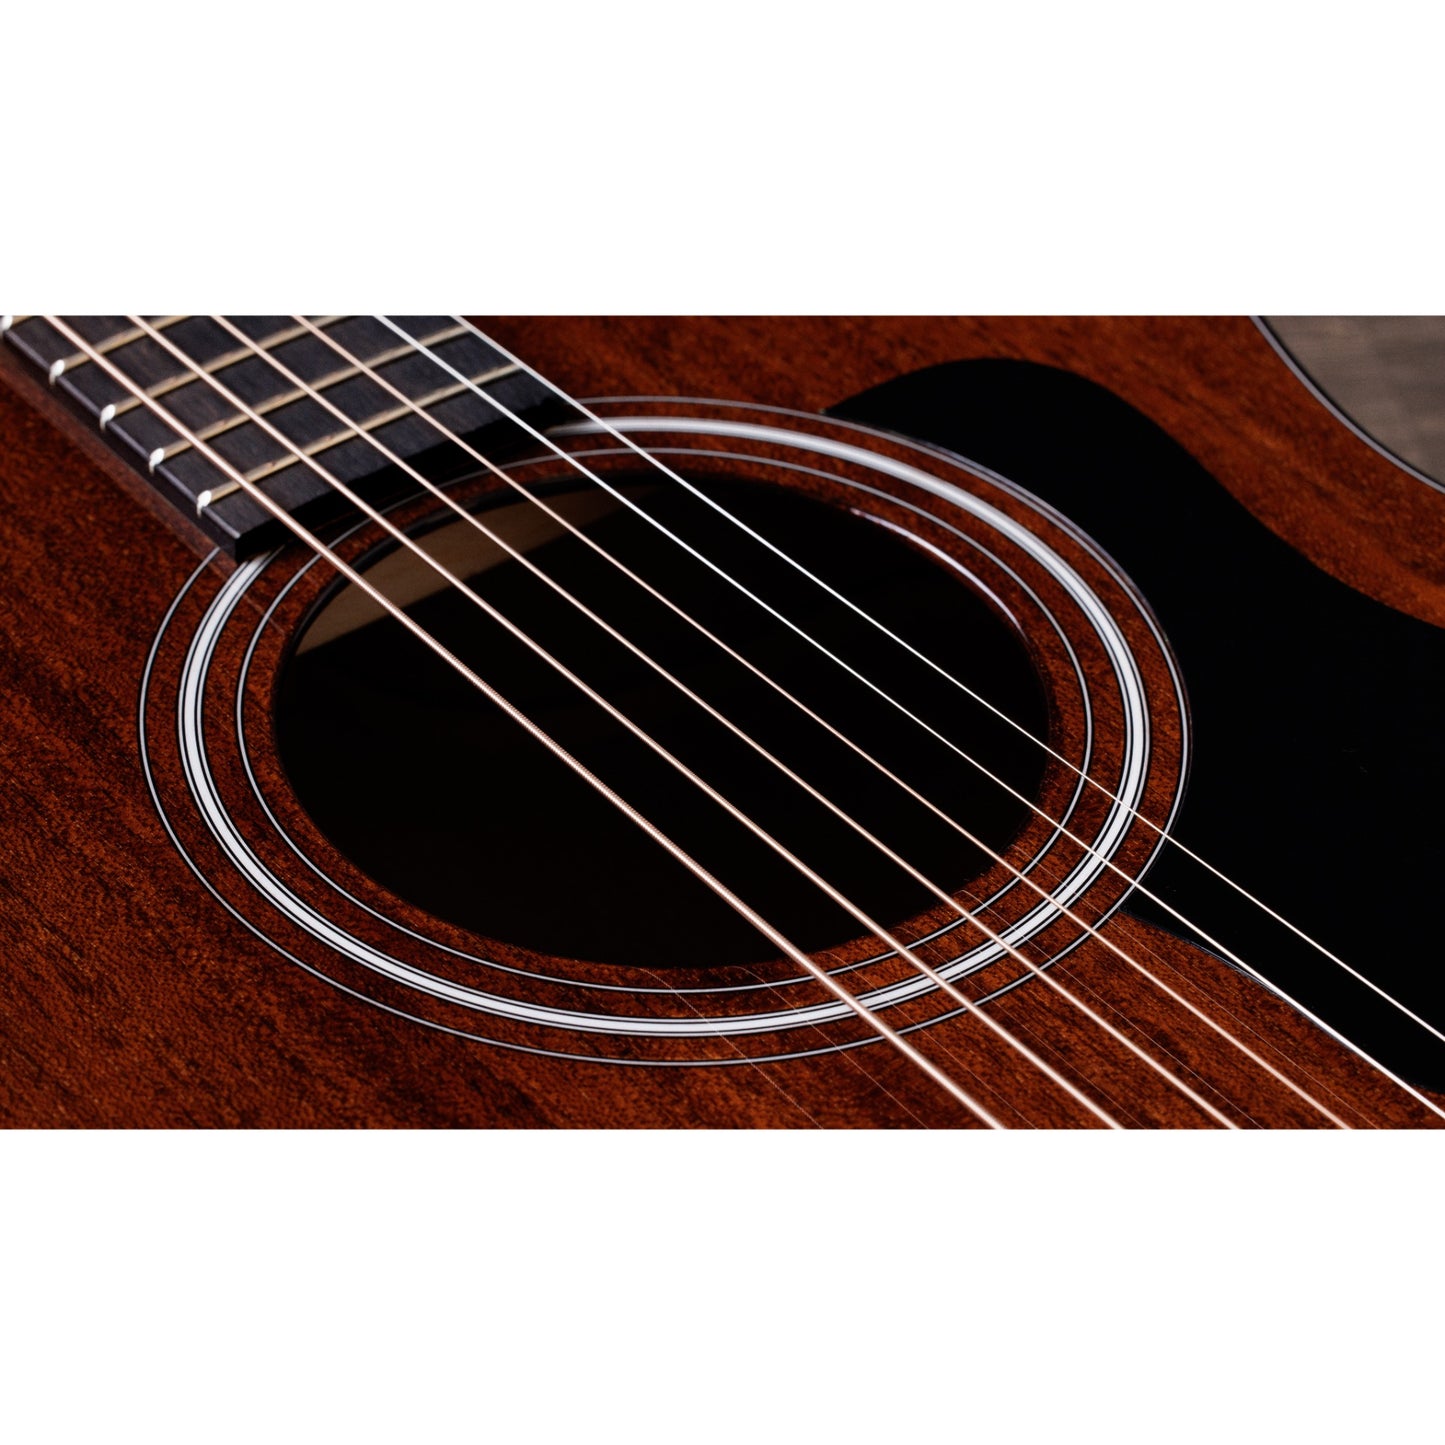 Taylor 224ce Plus Special Edition Acoustic Electric Guitar - Mahogany Top